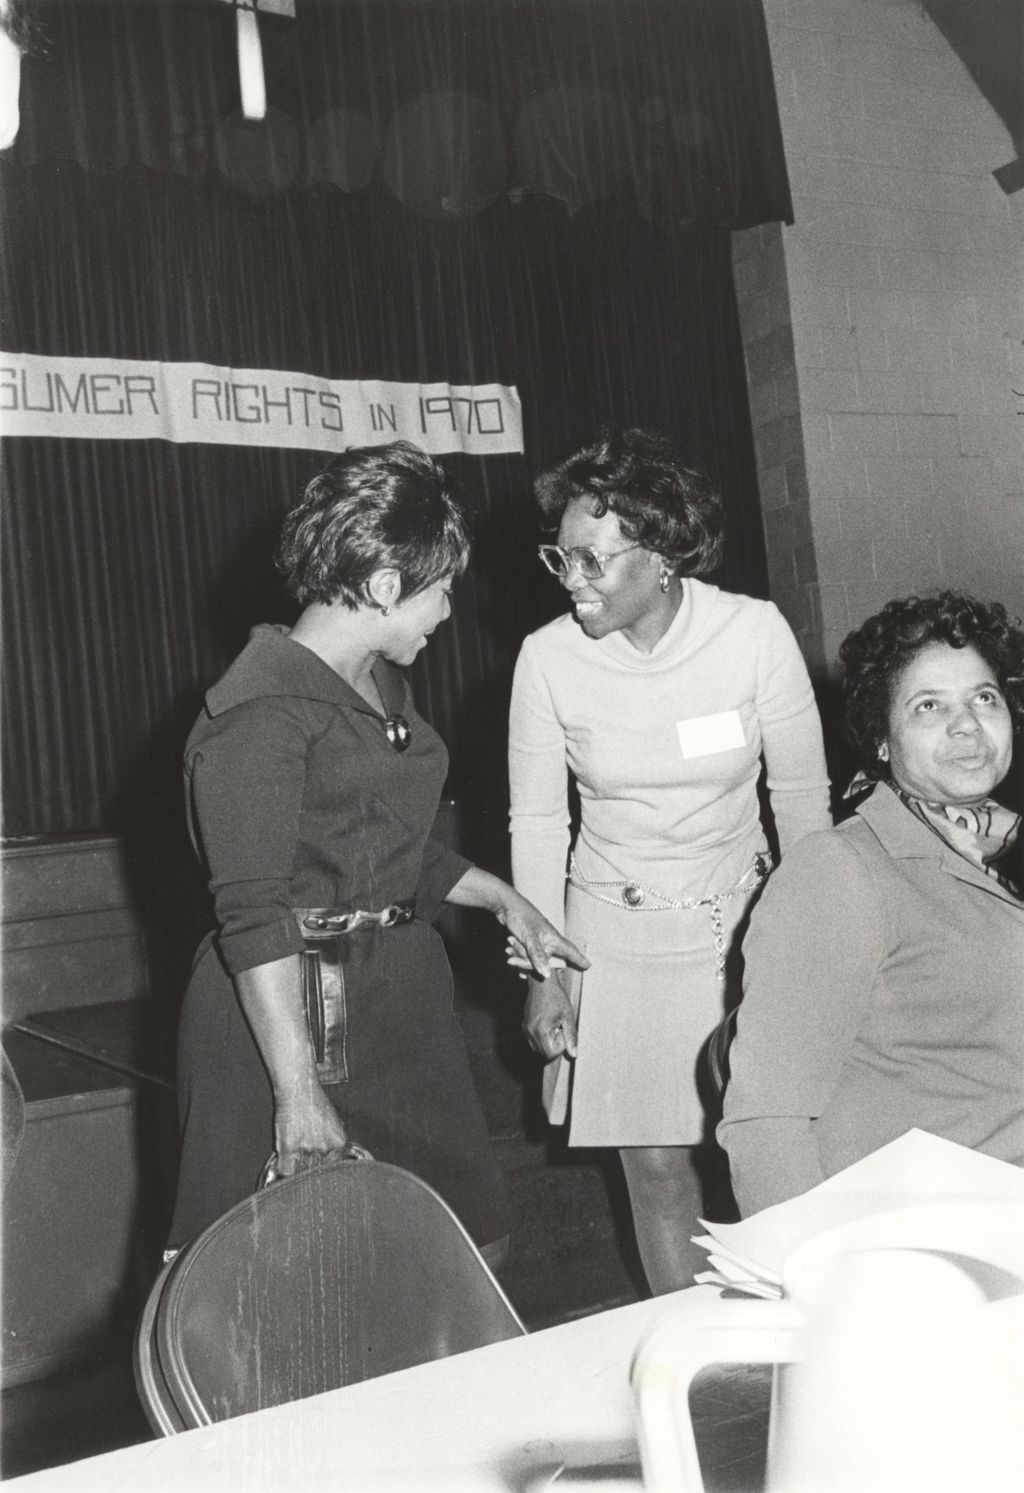 Miniature of Women at Consumer Rights in 1970 event